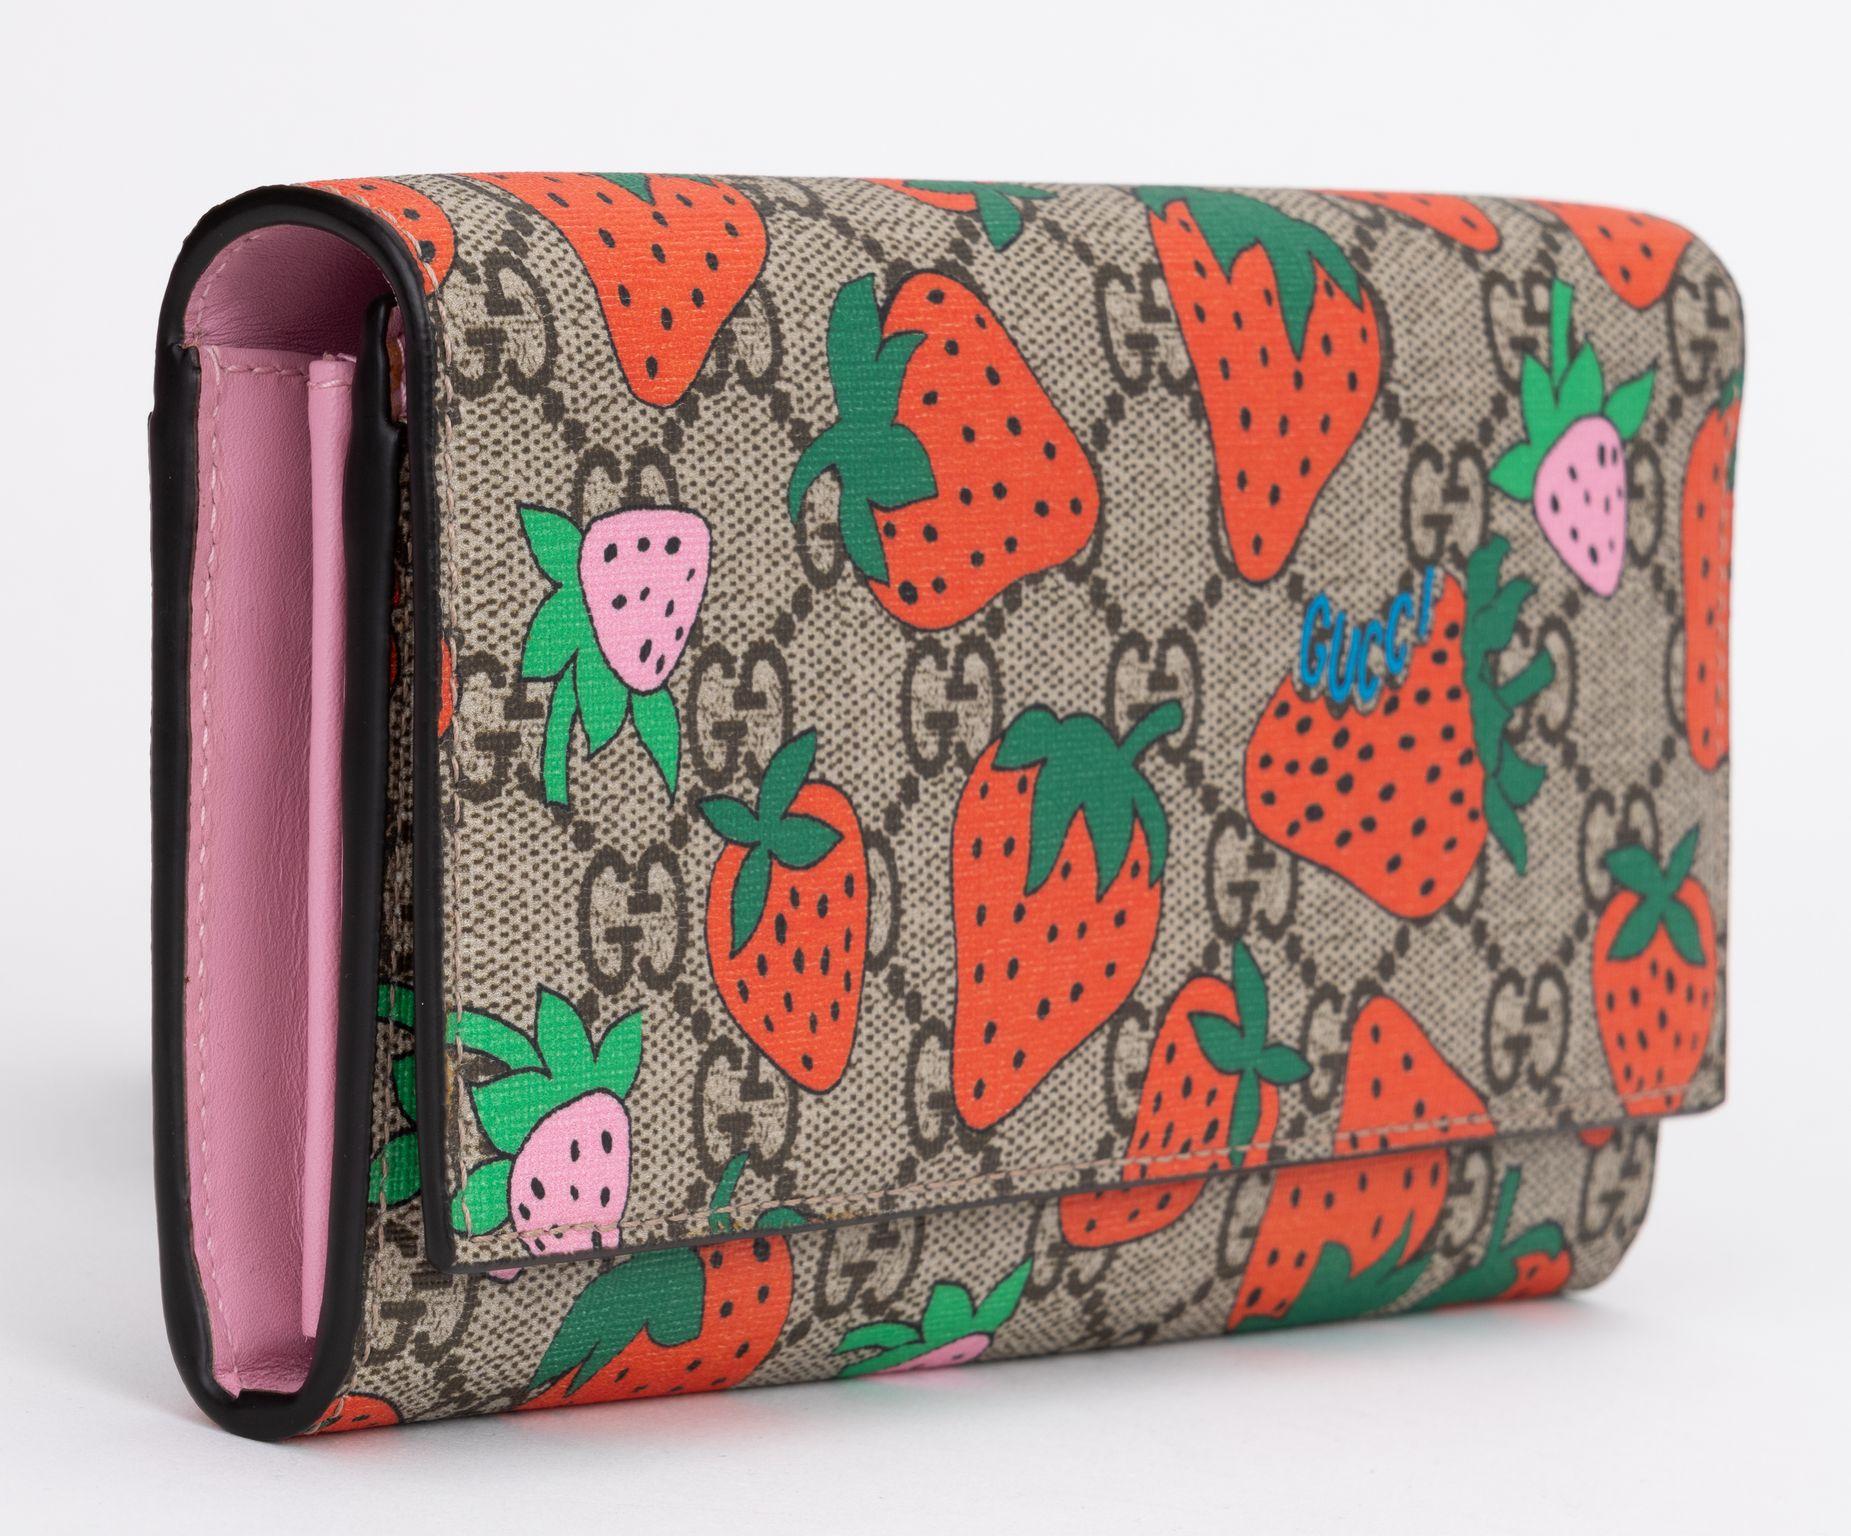 This is an authentic GUCCI GG Supreme Monogram Strawberry Flap Wallet in Light Pink. This stylish wallet is crafted of Gucci GG Supreme monogram coated canvas, with a red and pink strawberry print overlay. The crossover flap opens to a partitioned